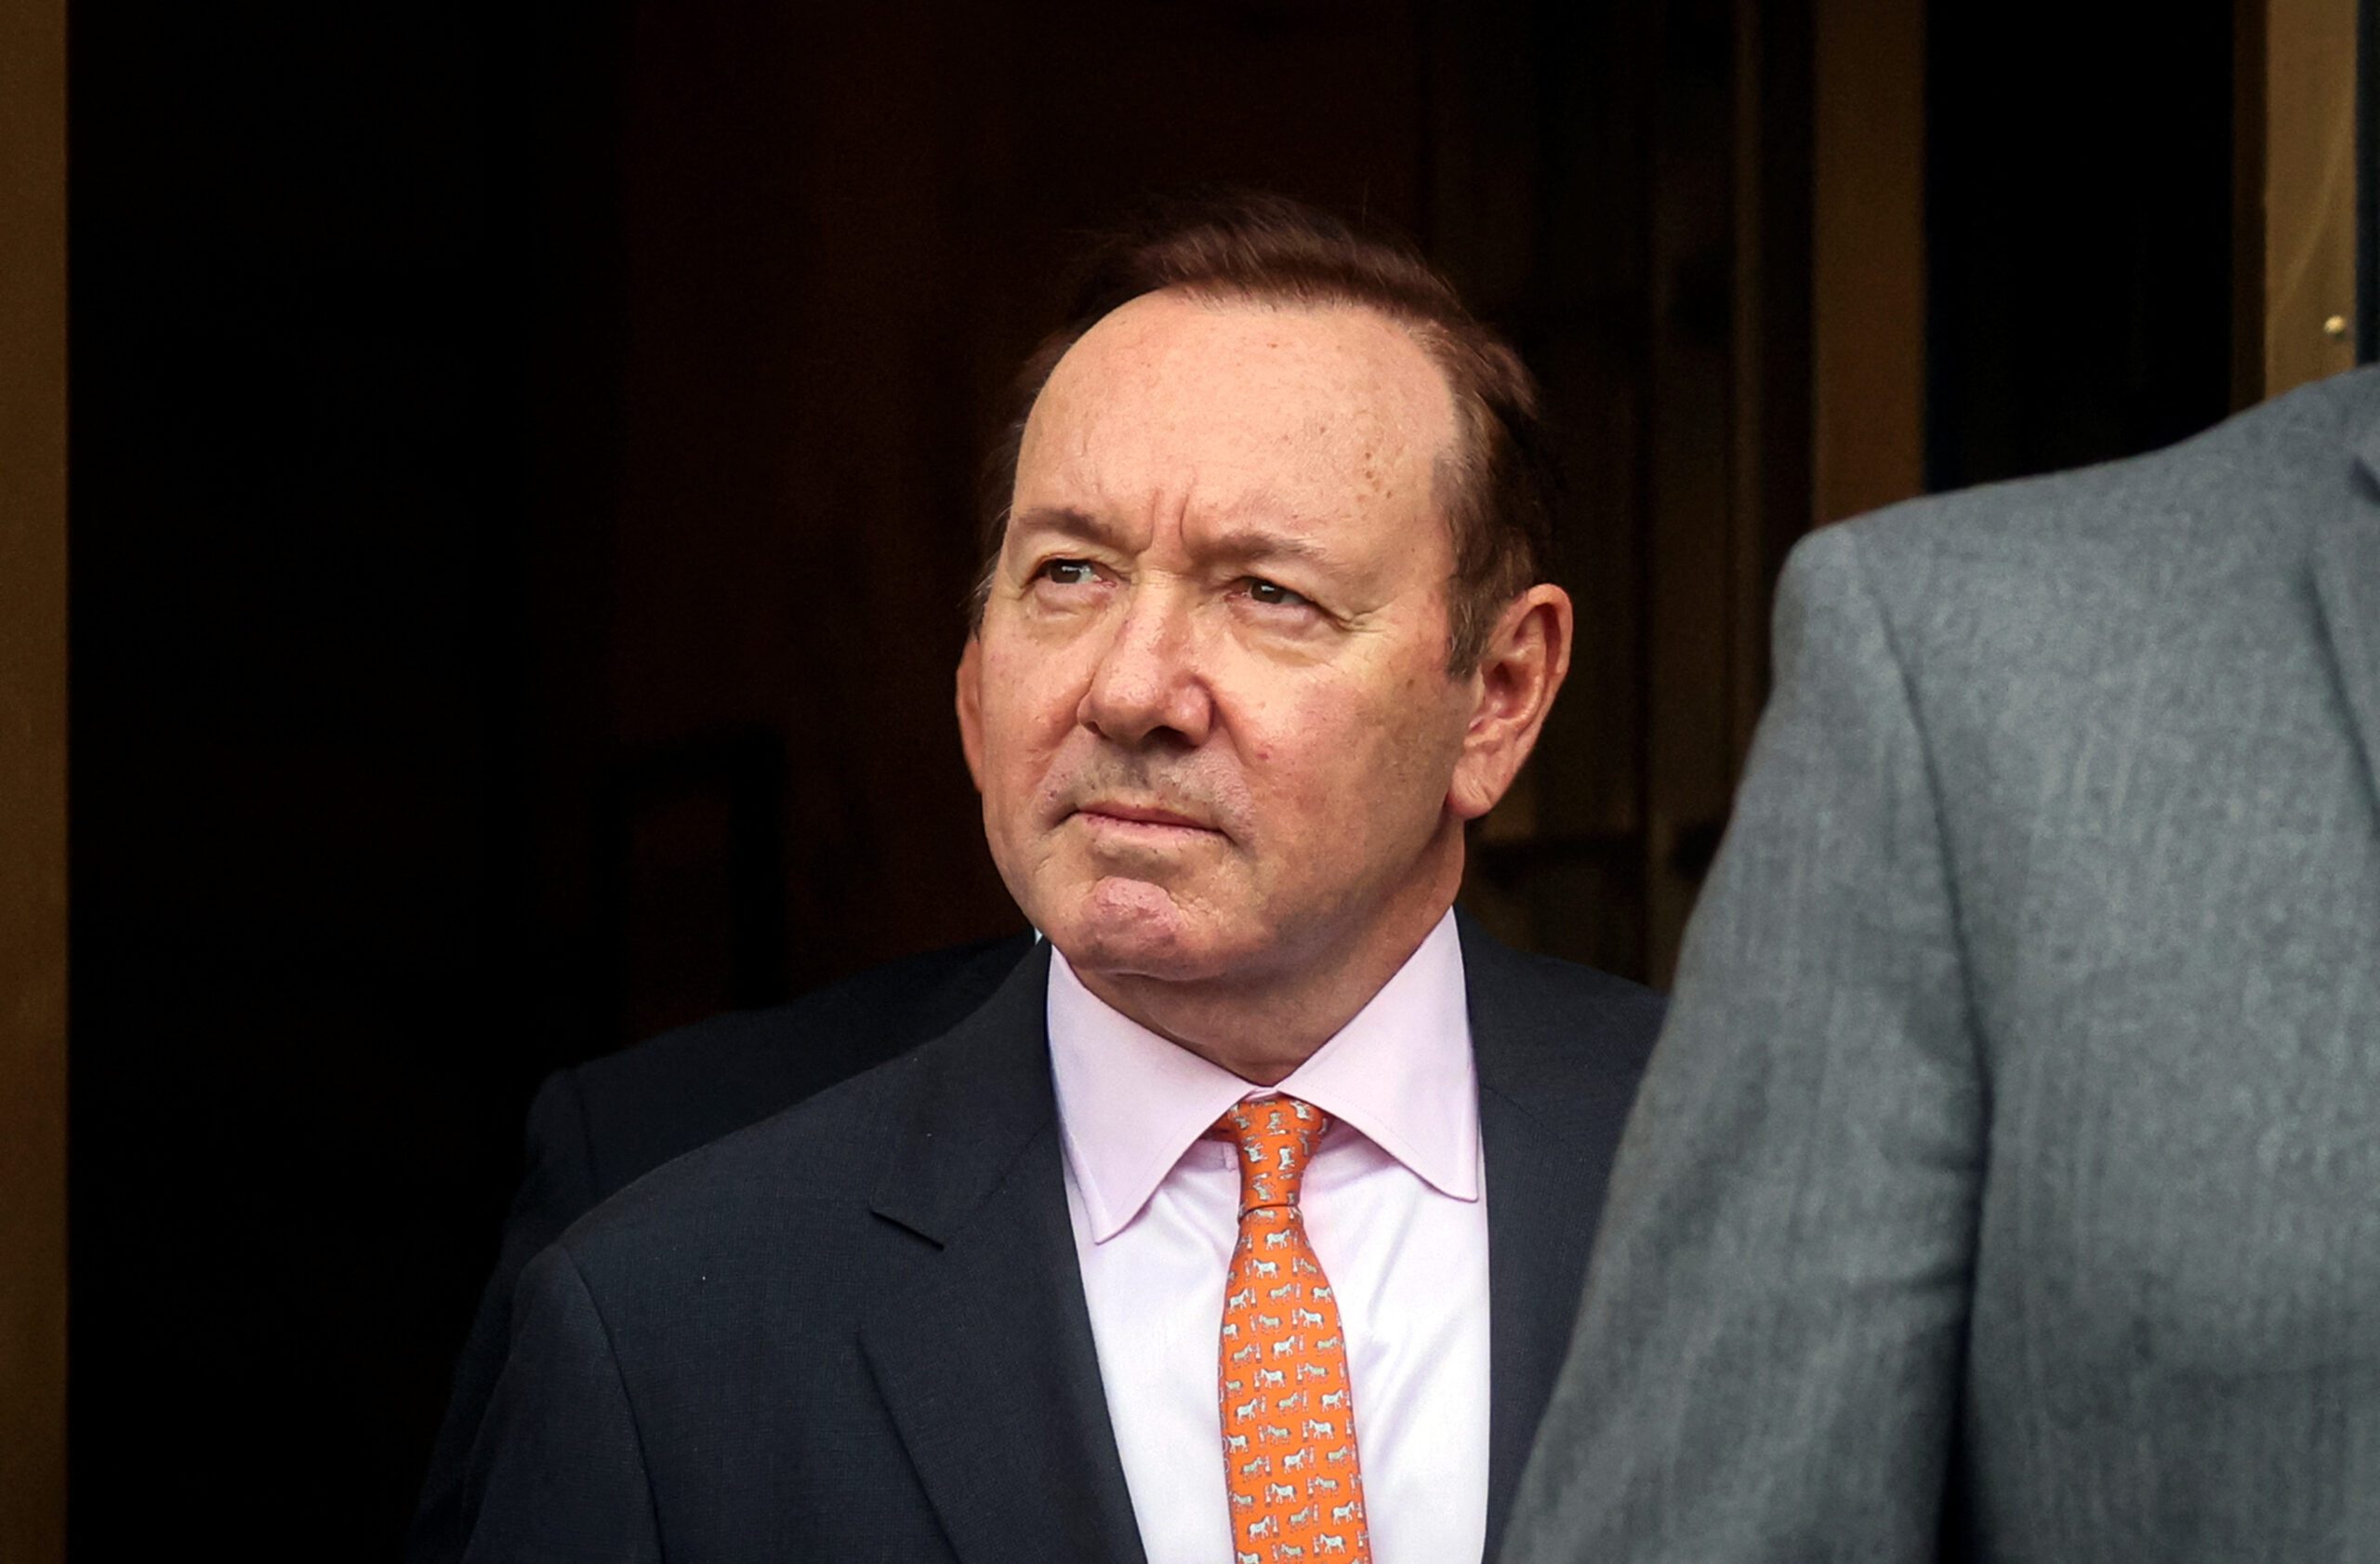 Kevin Spacey appears remotely in UK court ahead of sex offenses trial